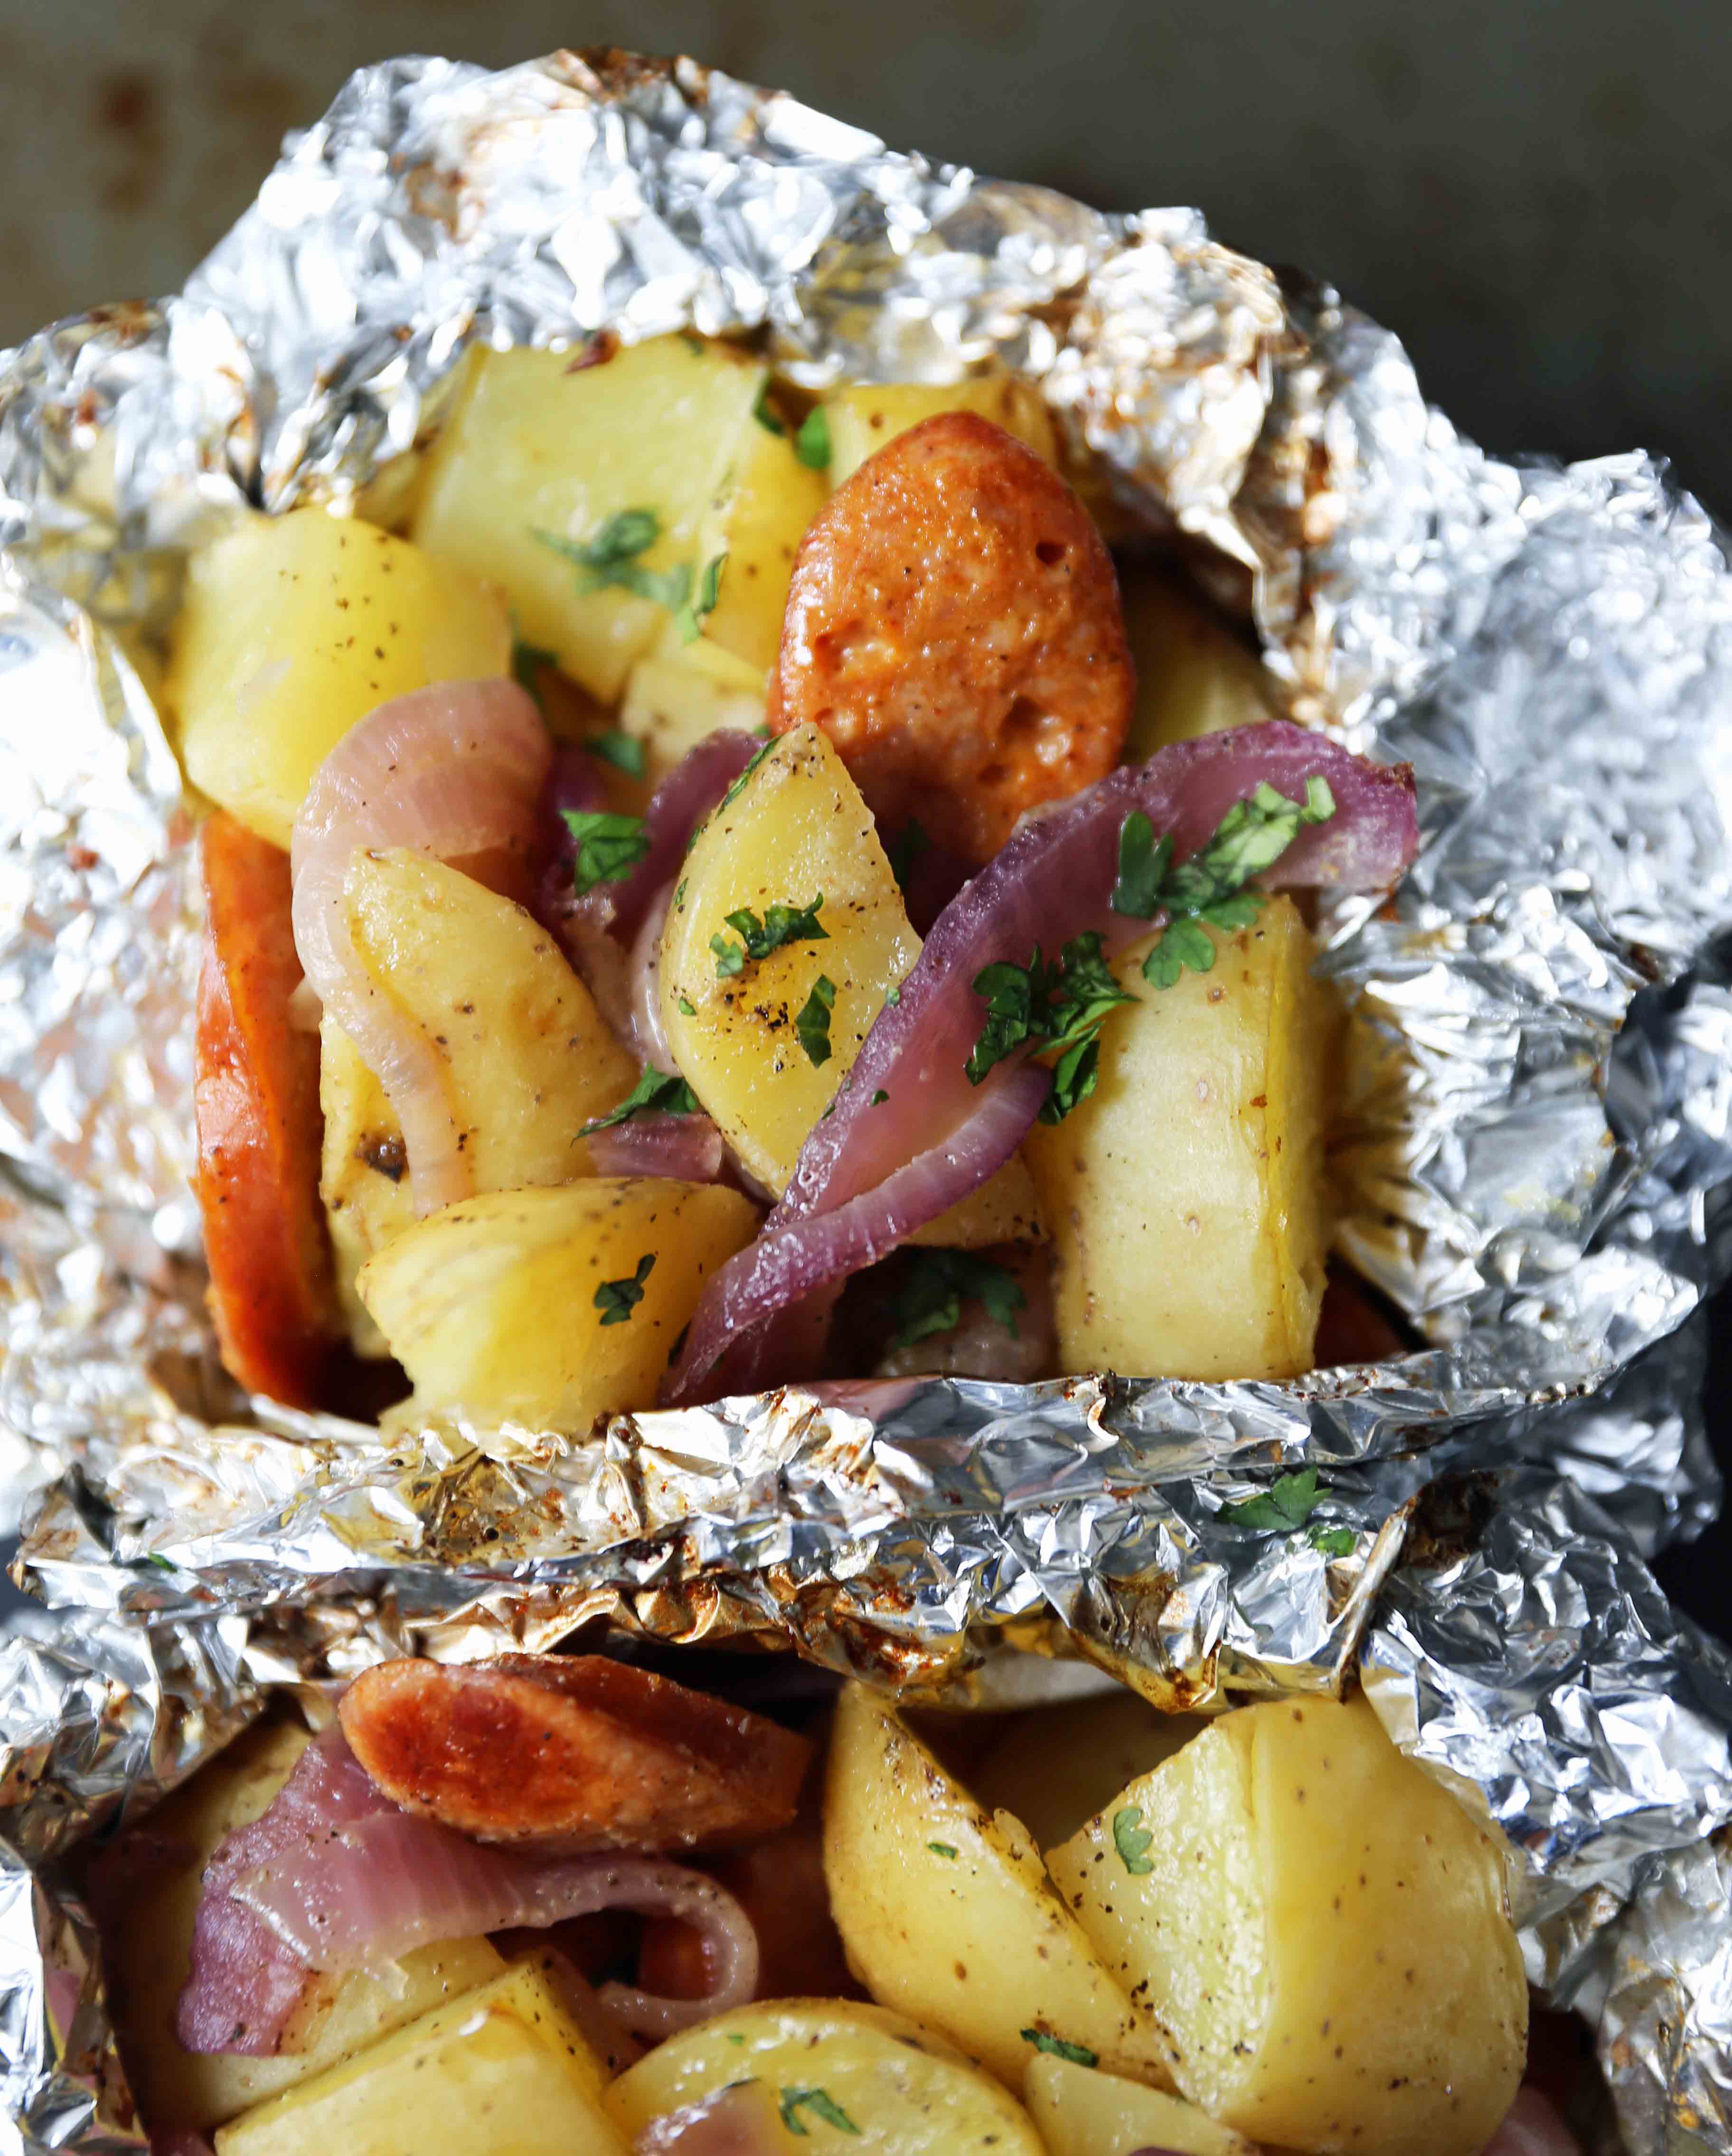 Sausage Potato Foil Packets The modern tin-foil dinner with hardwood smoked sausage and creamy gold potatoes. An easy and flavor-packed dinner. Foil packets cooked in the oven. #tinfoildinners #foilpackets #sausagepotatoes #sausagepotatofoilpackets #ovenfoilpackets